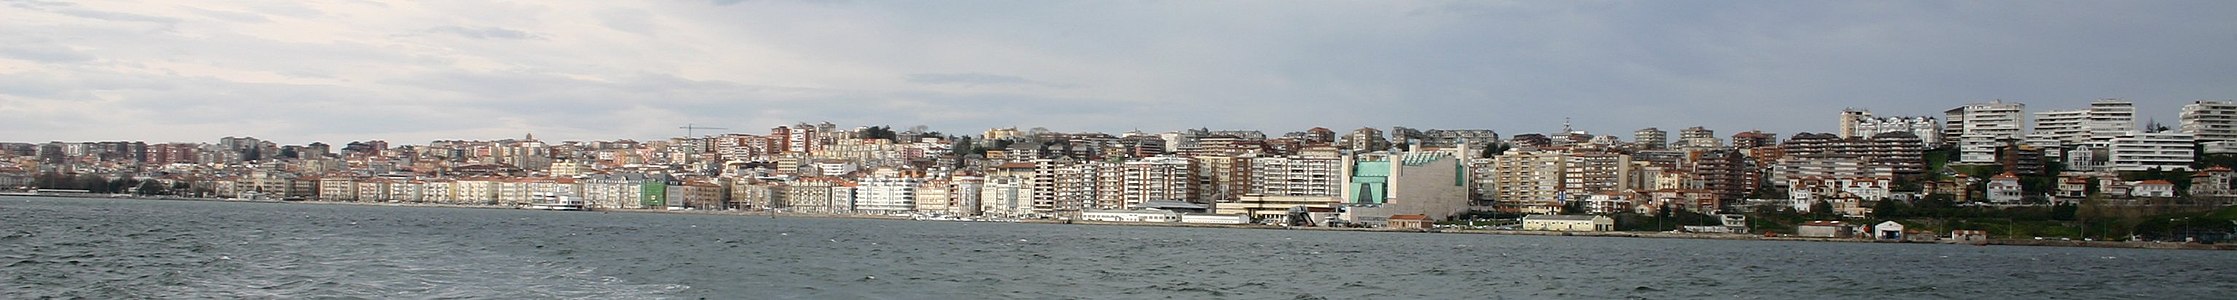 City of Santander from the Bay.